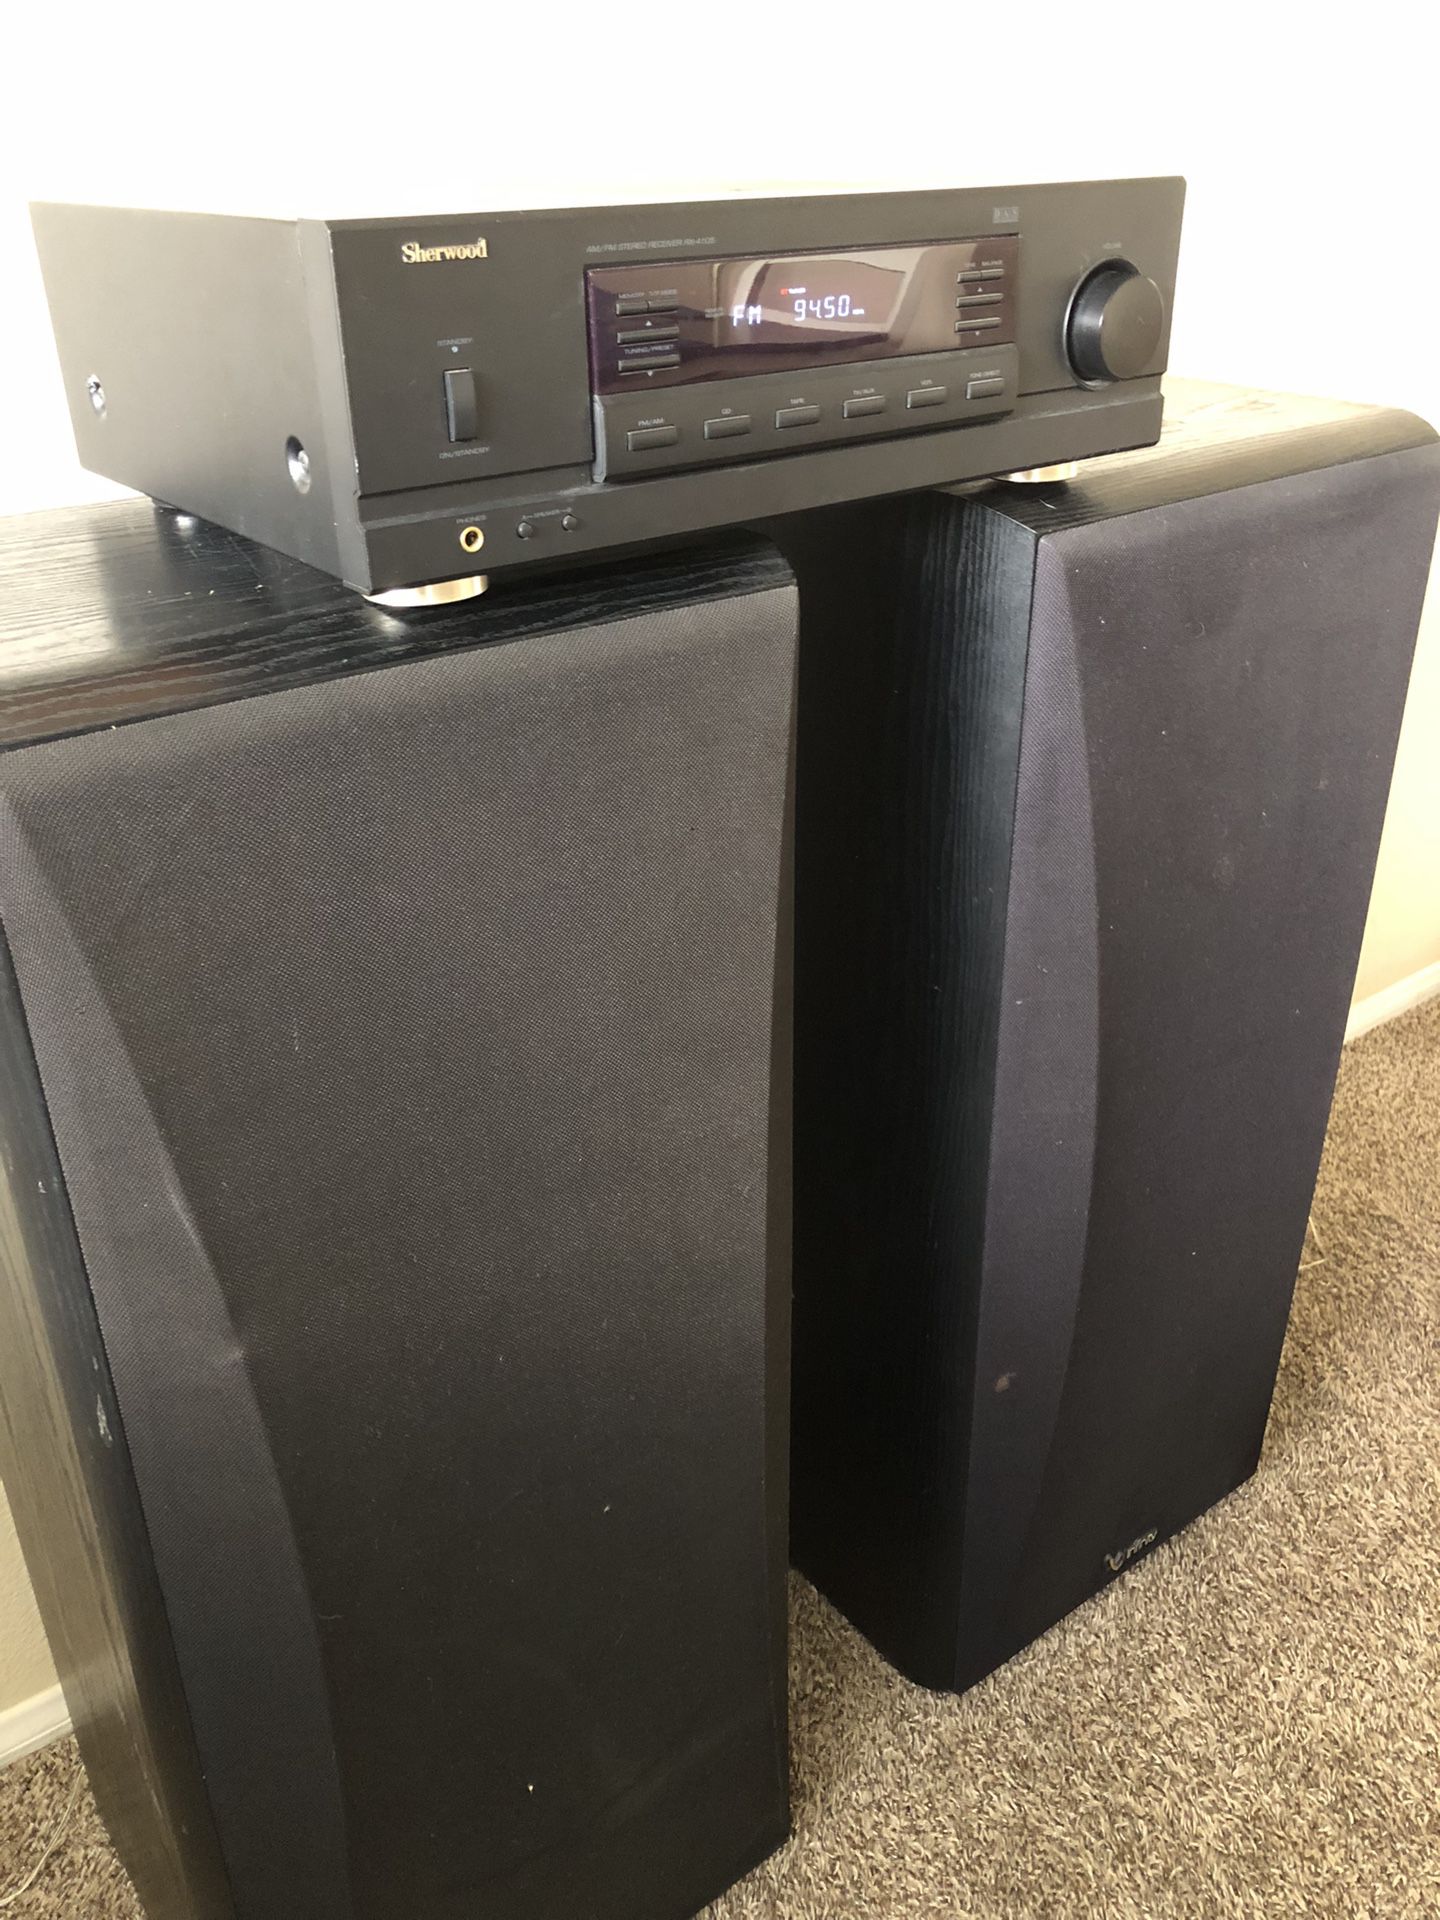 Sherwood Discrete Stereo System With Speakers